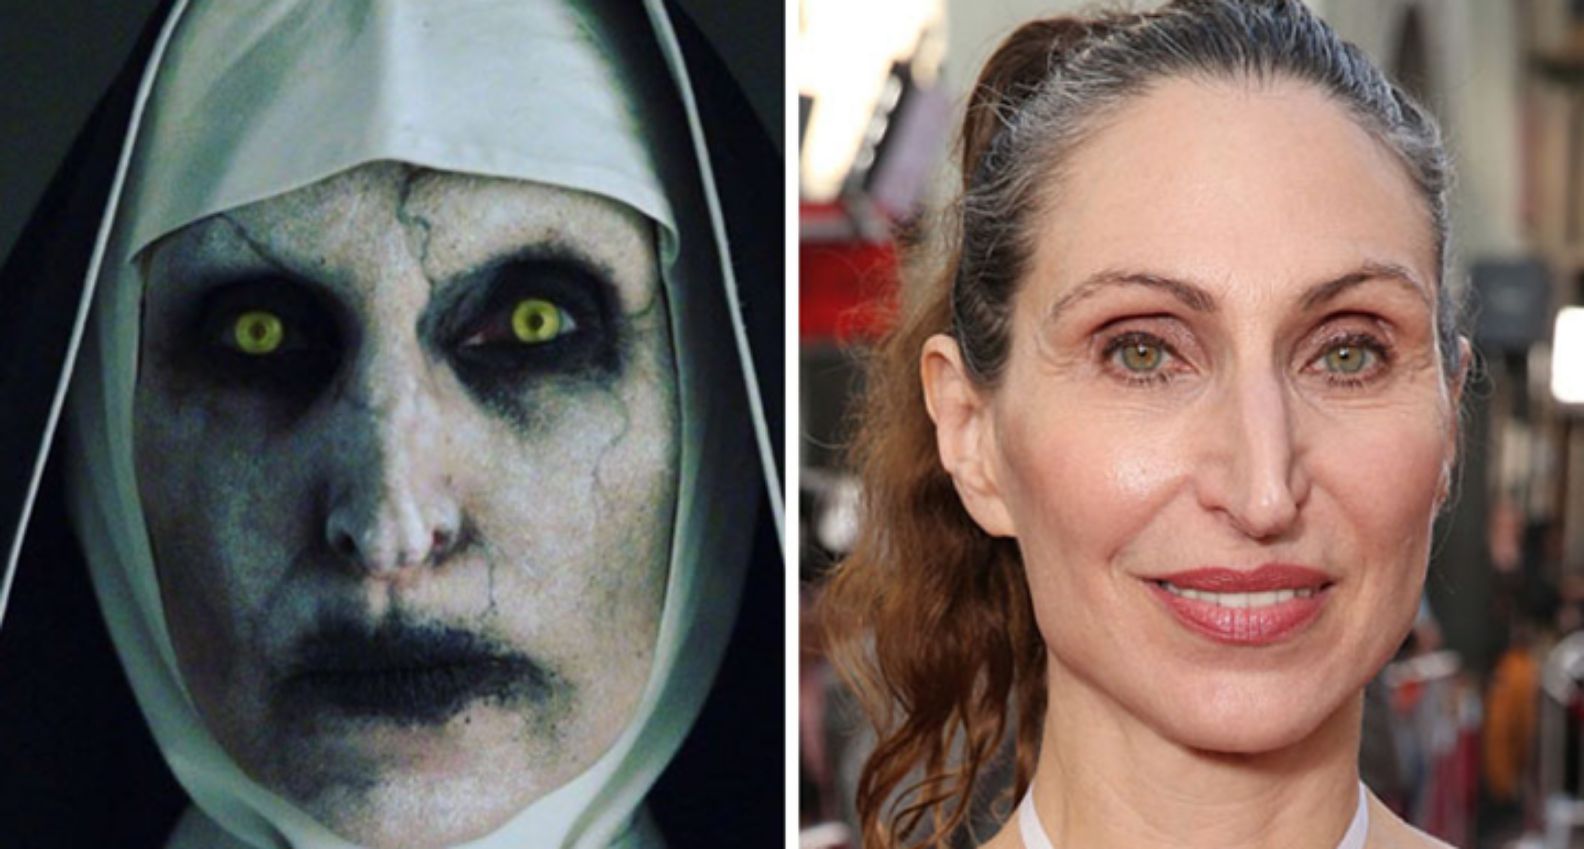 horror movie actors, what do they look like without makeup?